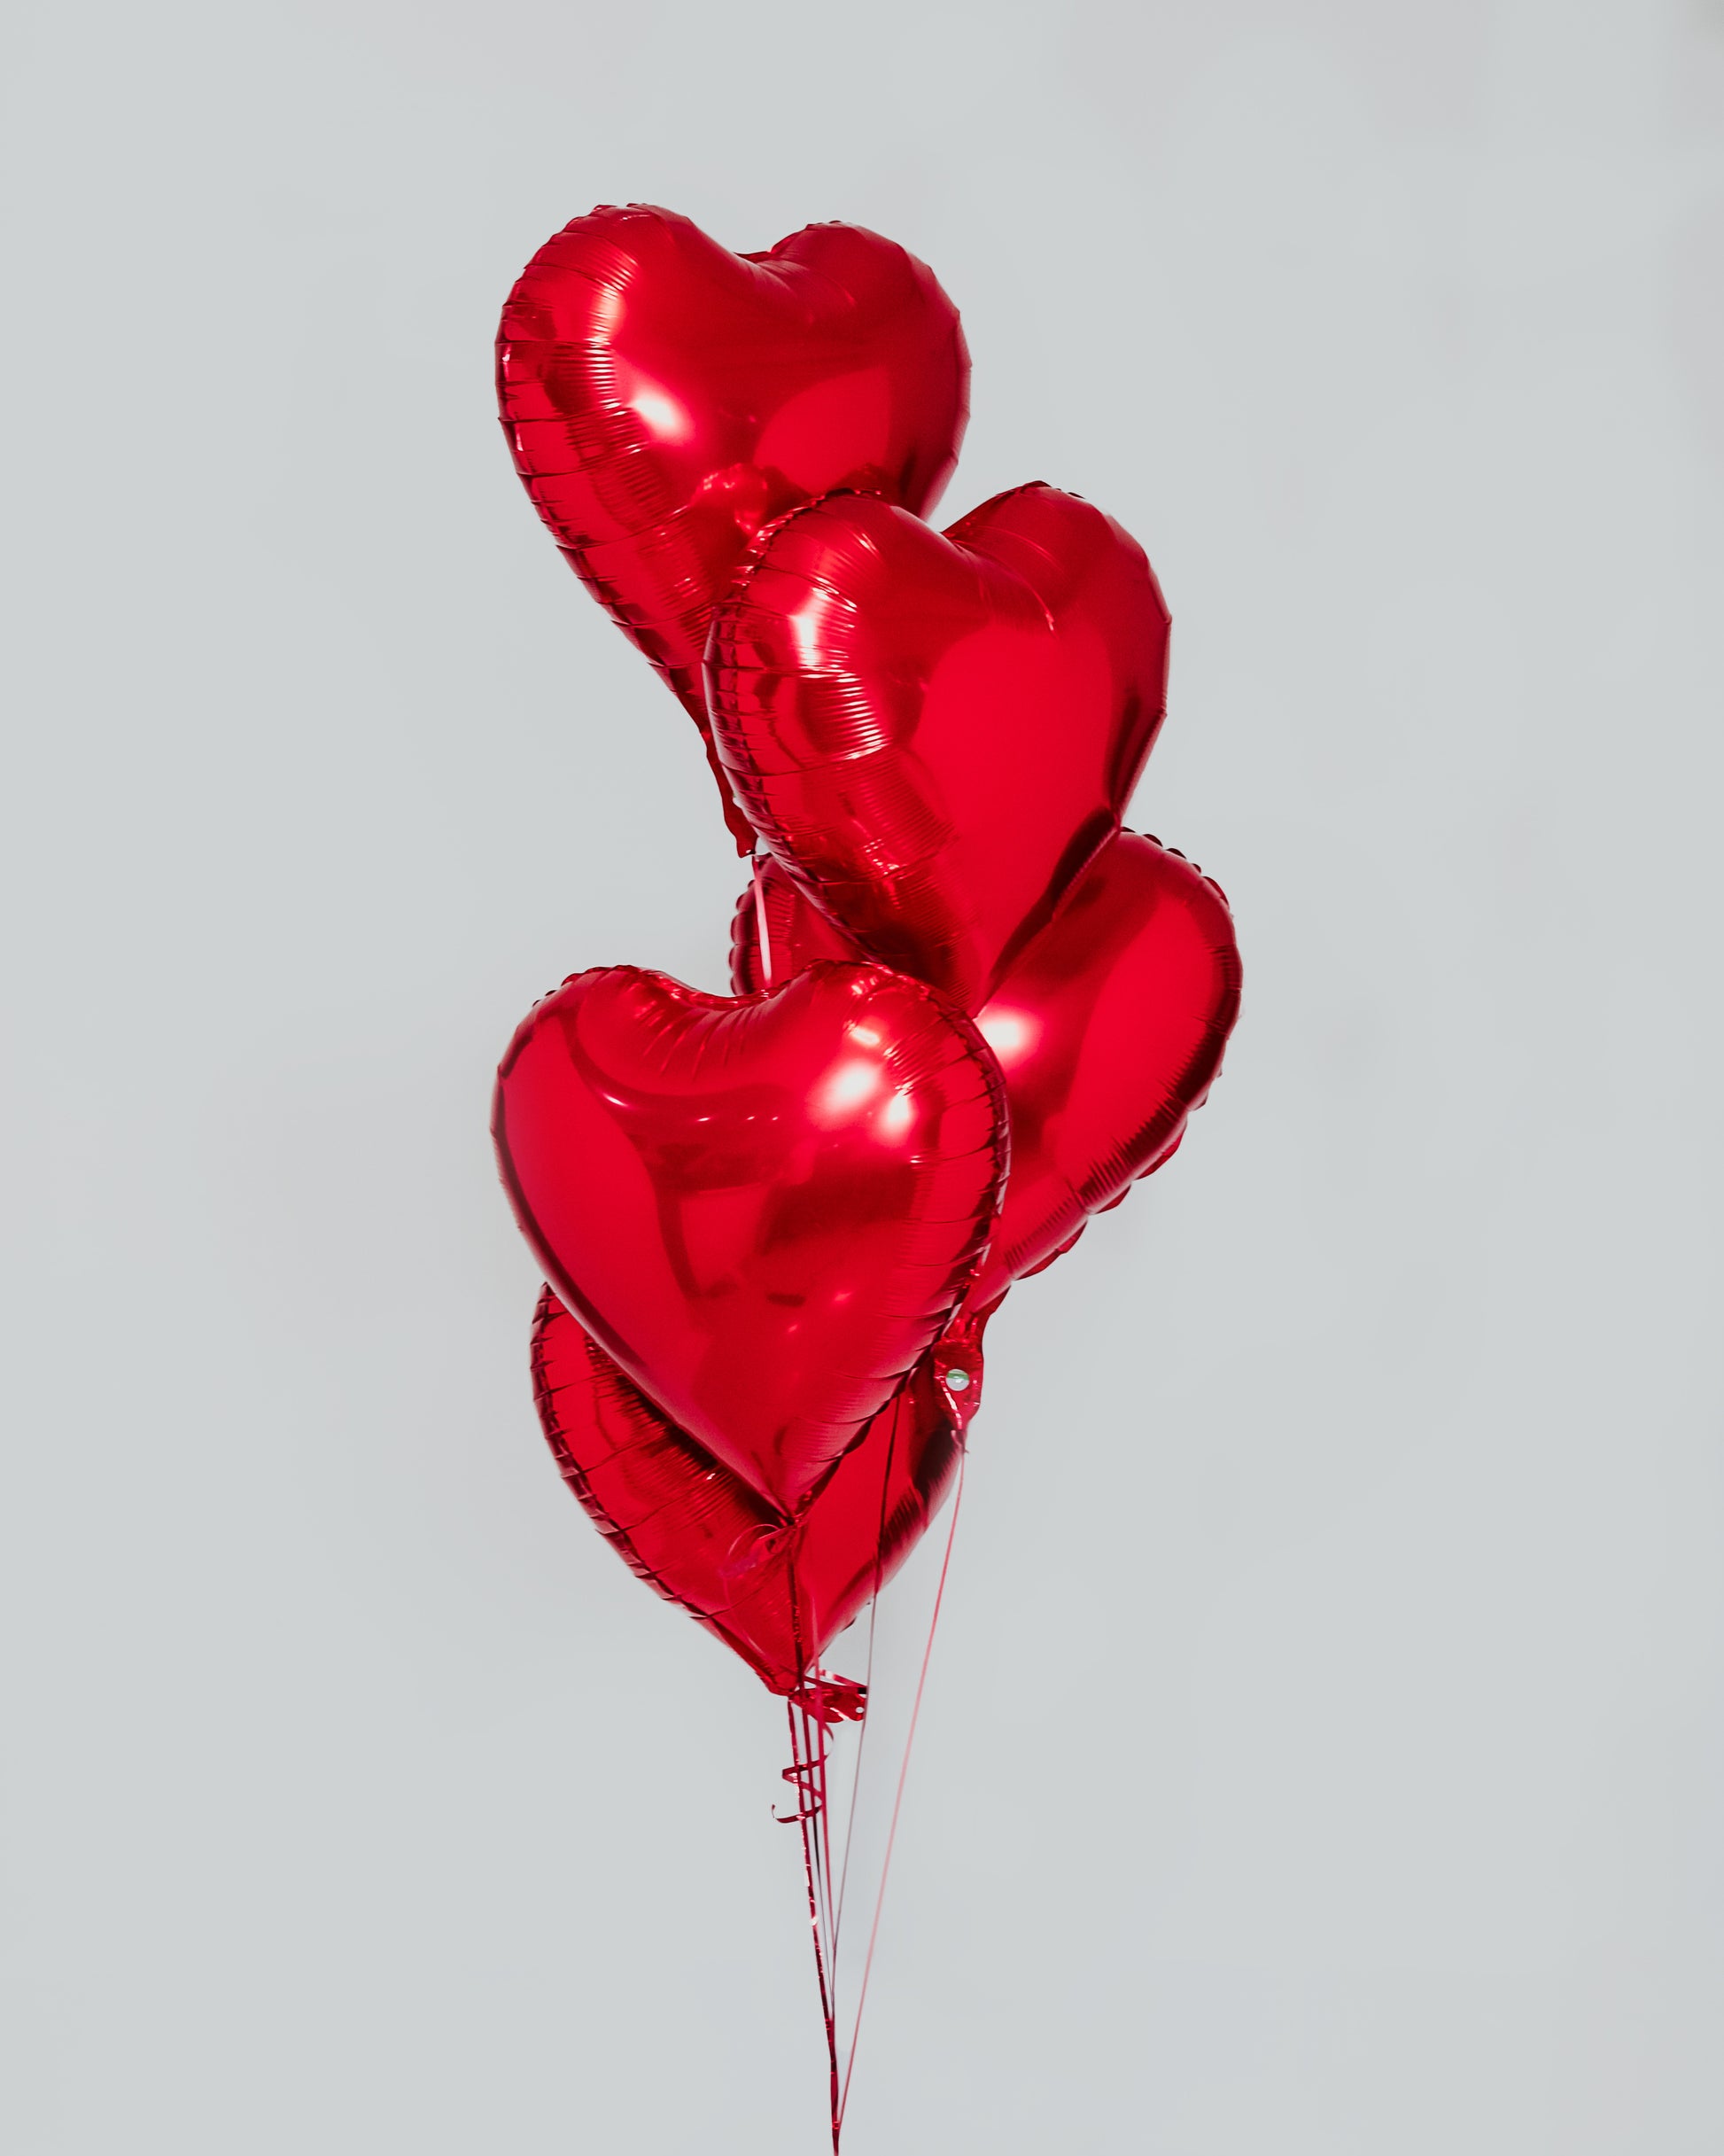 Five heart-shaped foil balloons, adding a festive touch to Valentine's Day.